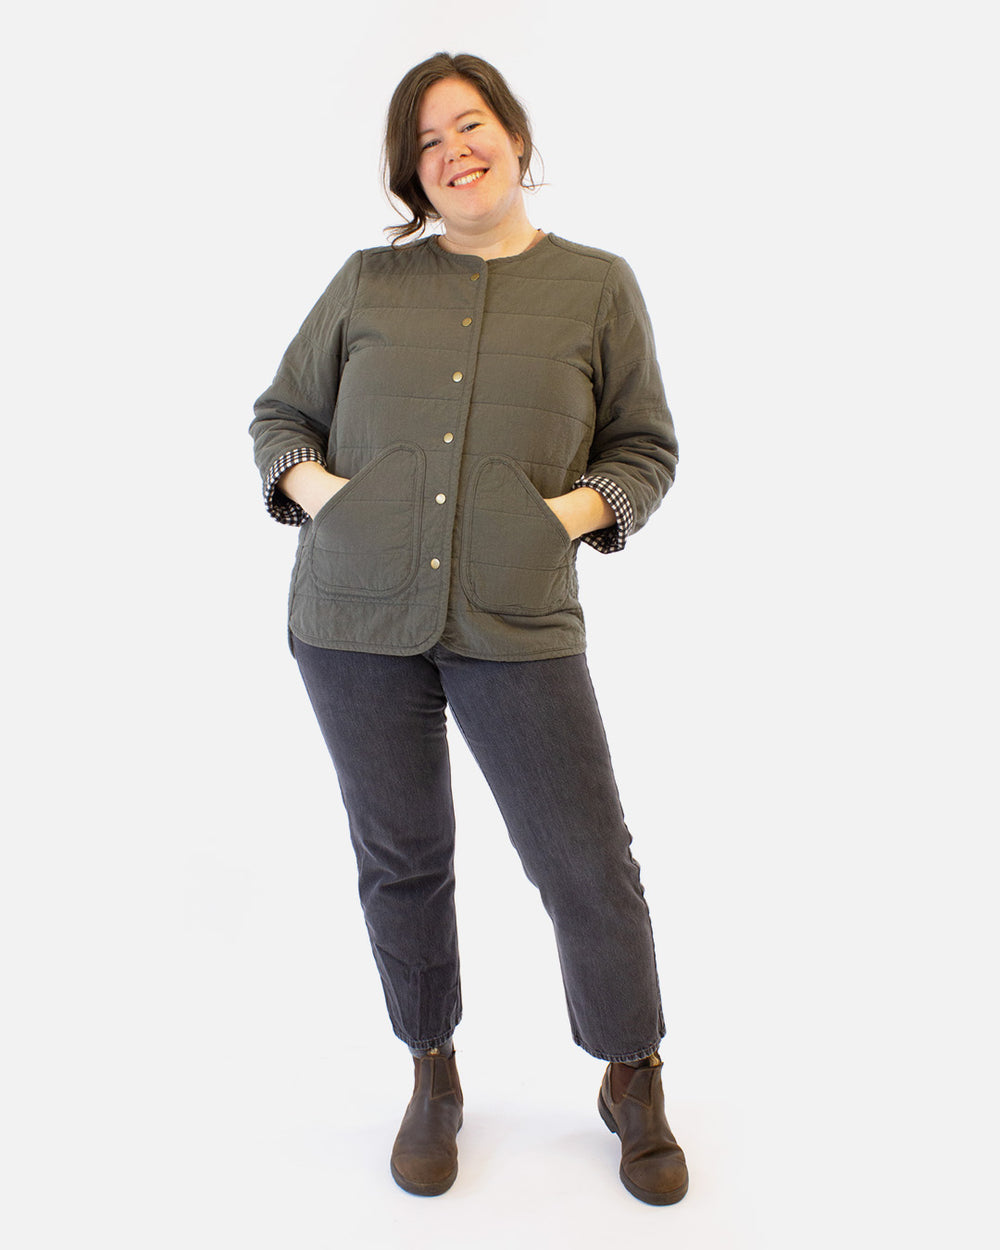 Woman wearing the Unisex Wildwood Jacket sewing pattern from Helen's Closet on The Fold Line. A Quilted Jacket pattern made in cotton, flannel, linen, wool, and hemp fabrics, featuring overlapping shoulder and side seams, bias taped edges, patch pockets, 